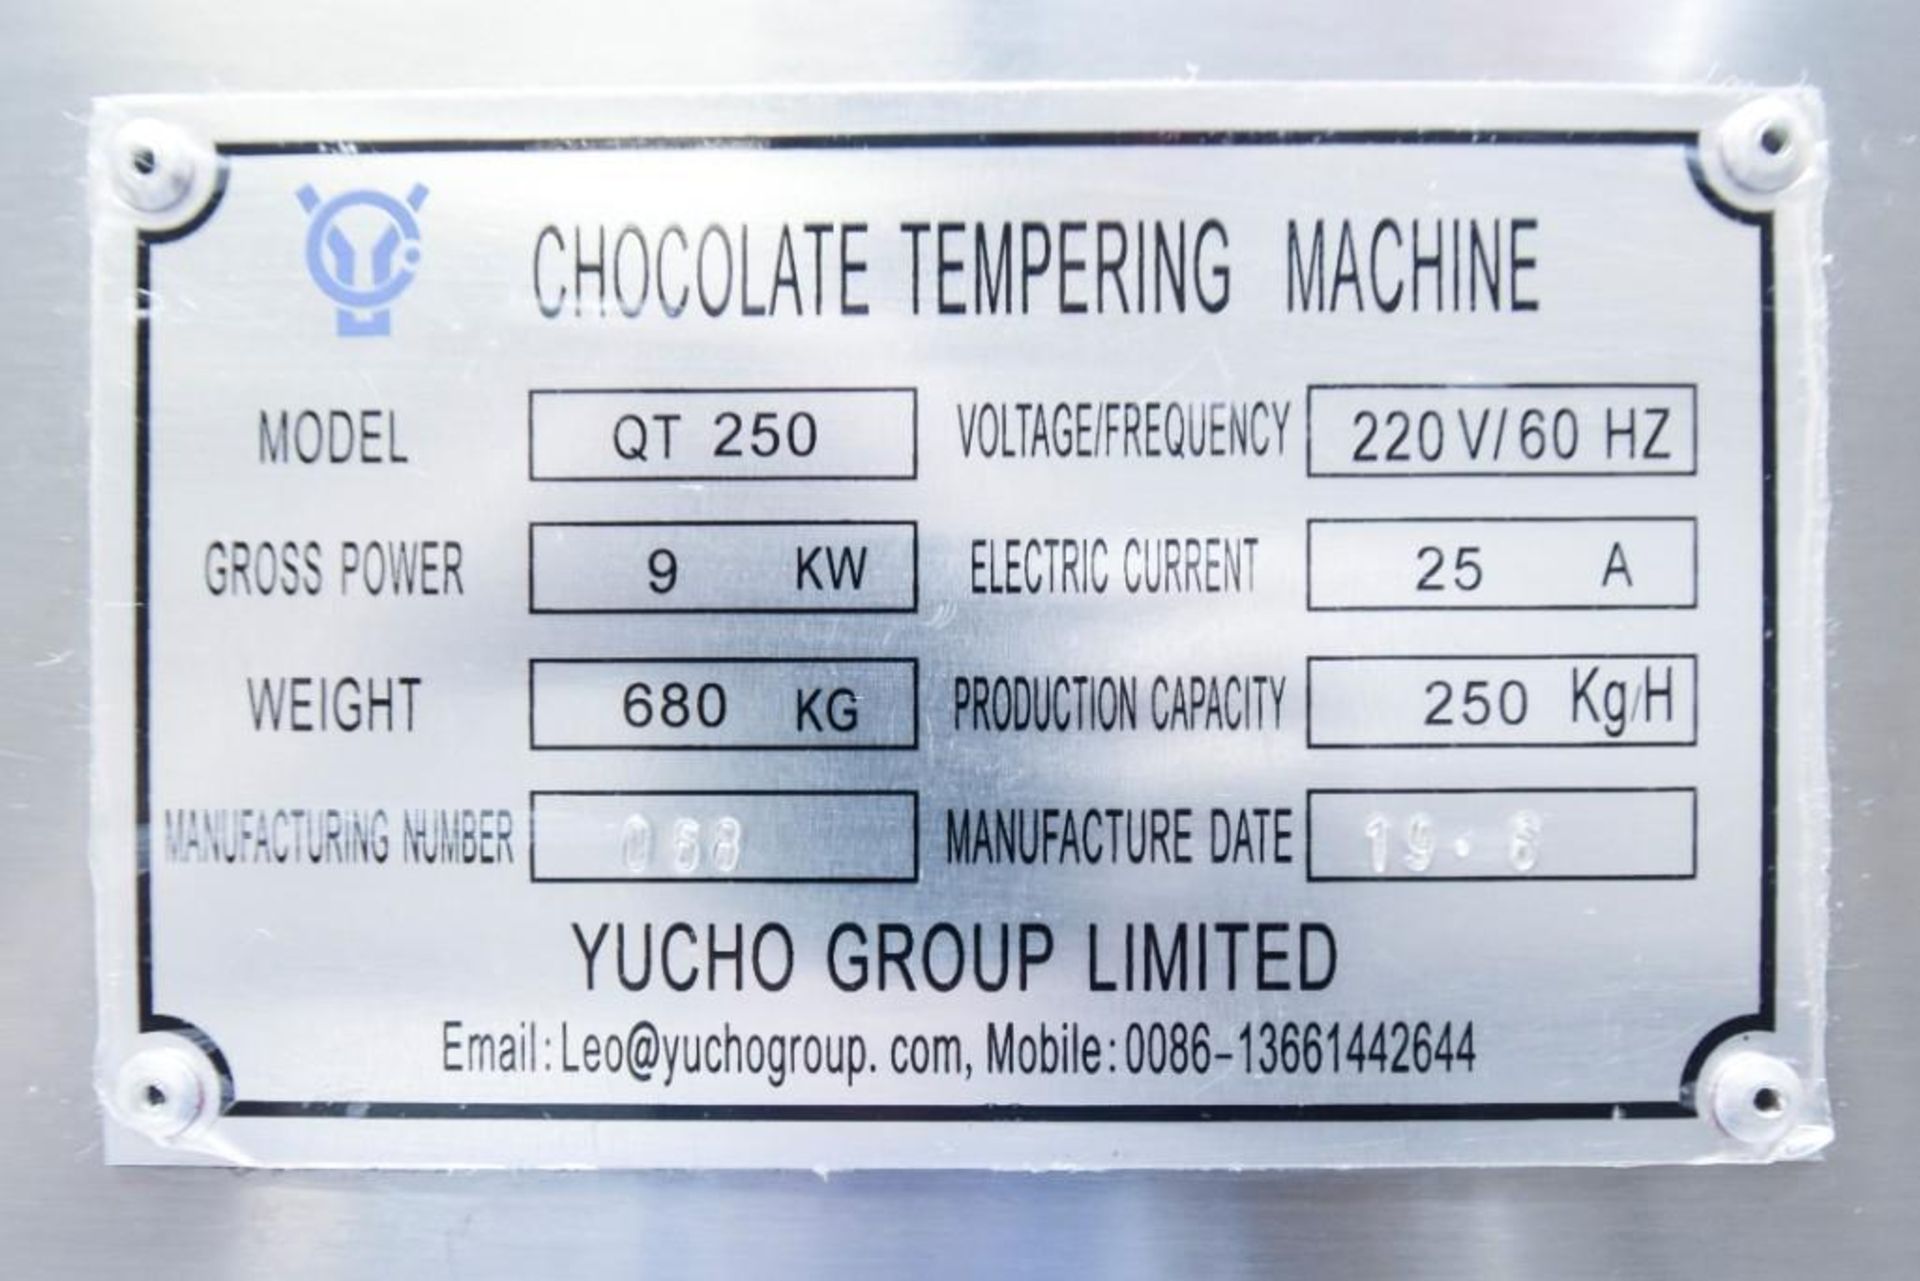 Chocolate Tempering Machine Yucho Group Limited QT 250 - Image 7 of 7